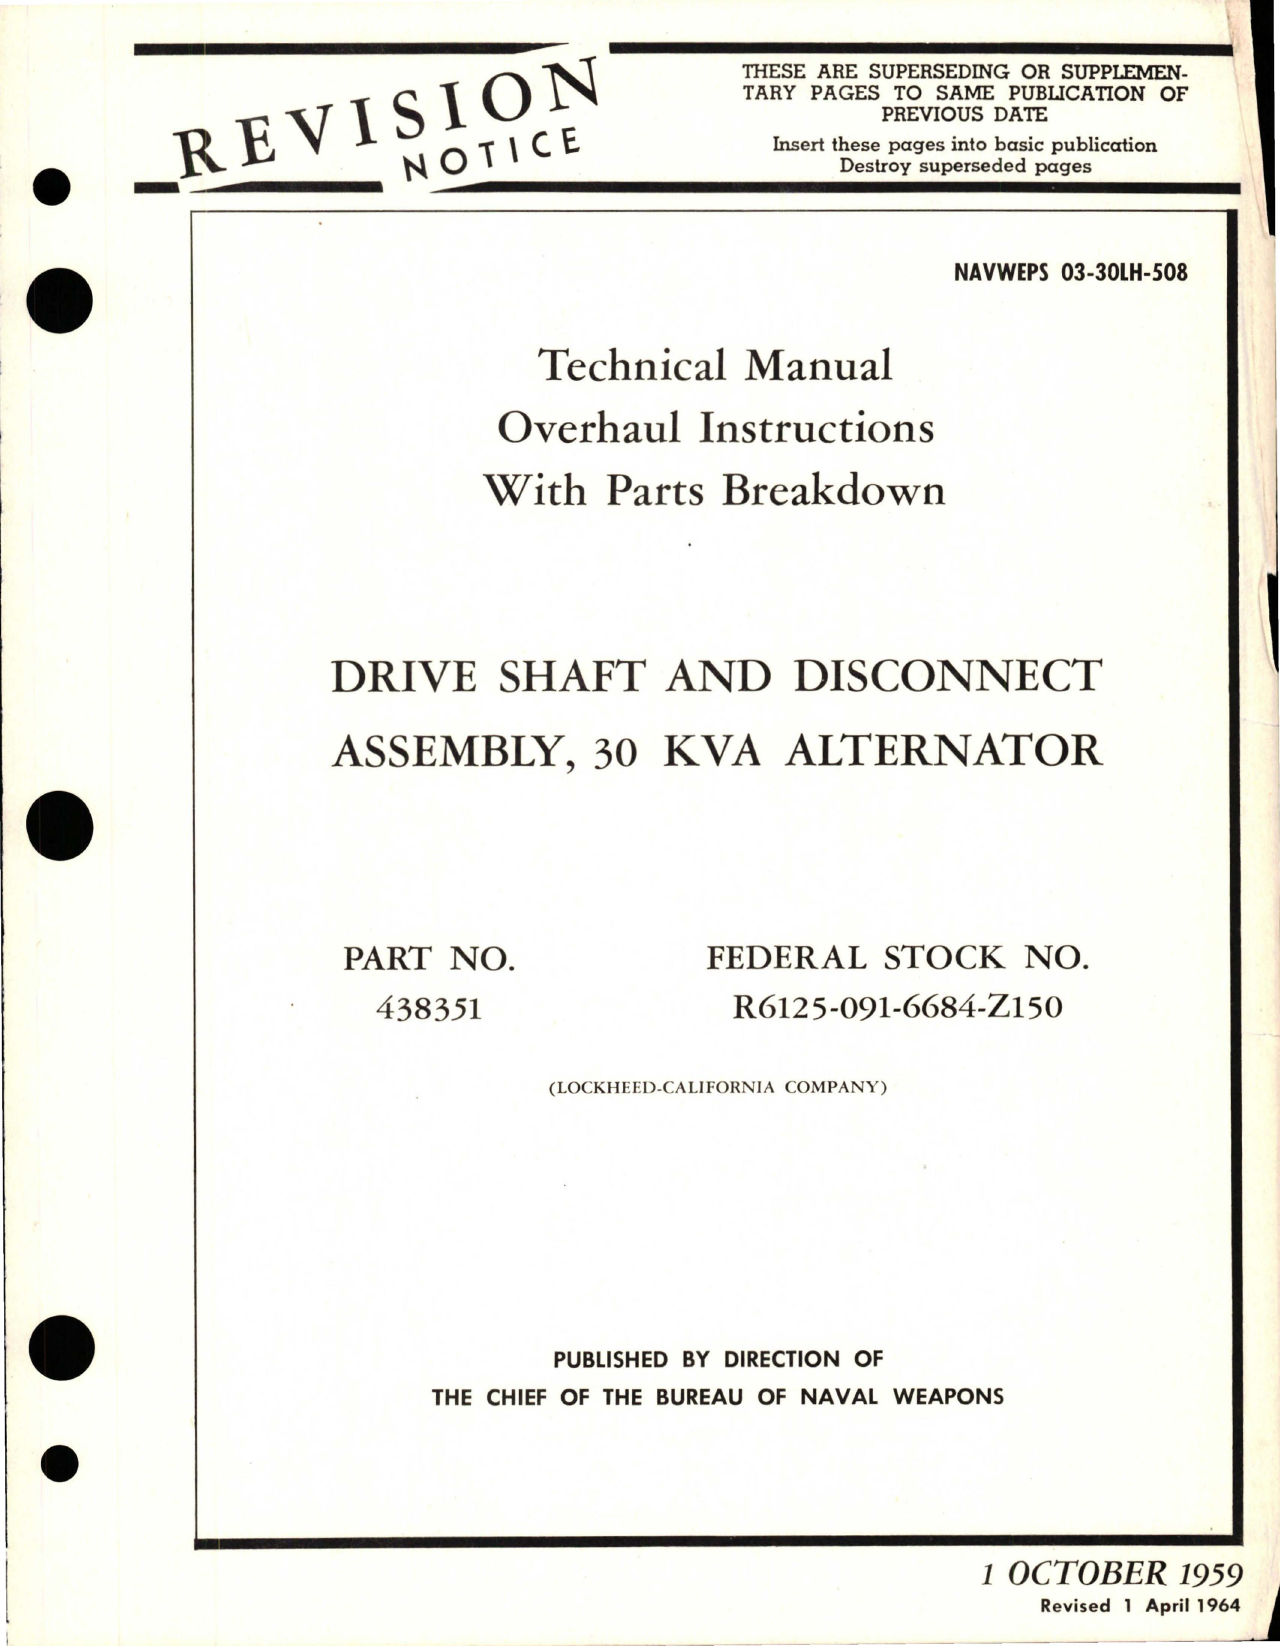 Sample page 1 from AirCorps Library document: Overhaul Instructions with Parts Breakdown for Drive Shaft & Disconnect Assembly - 30 KVA Alternator - Part 438351